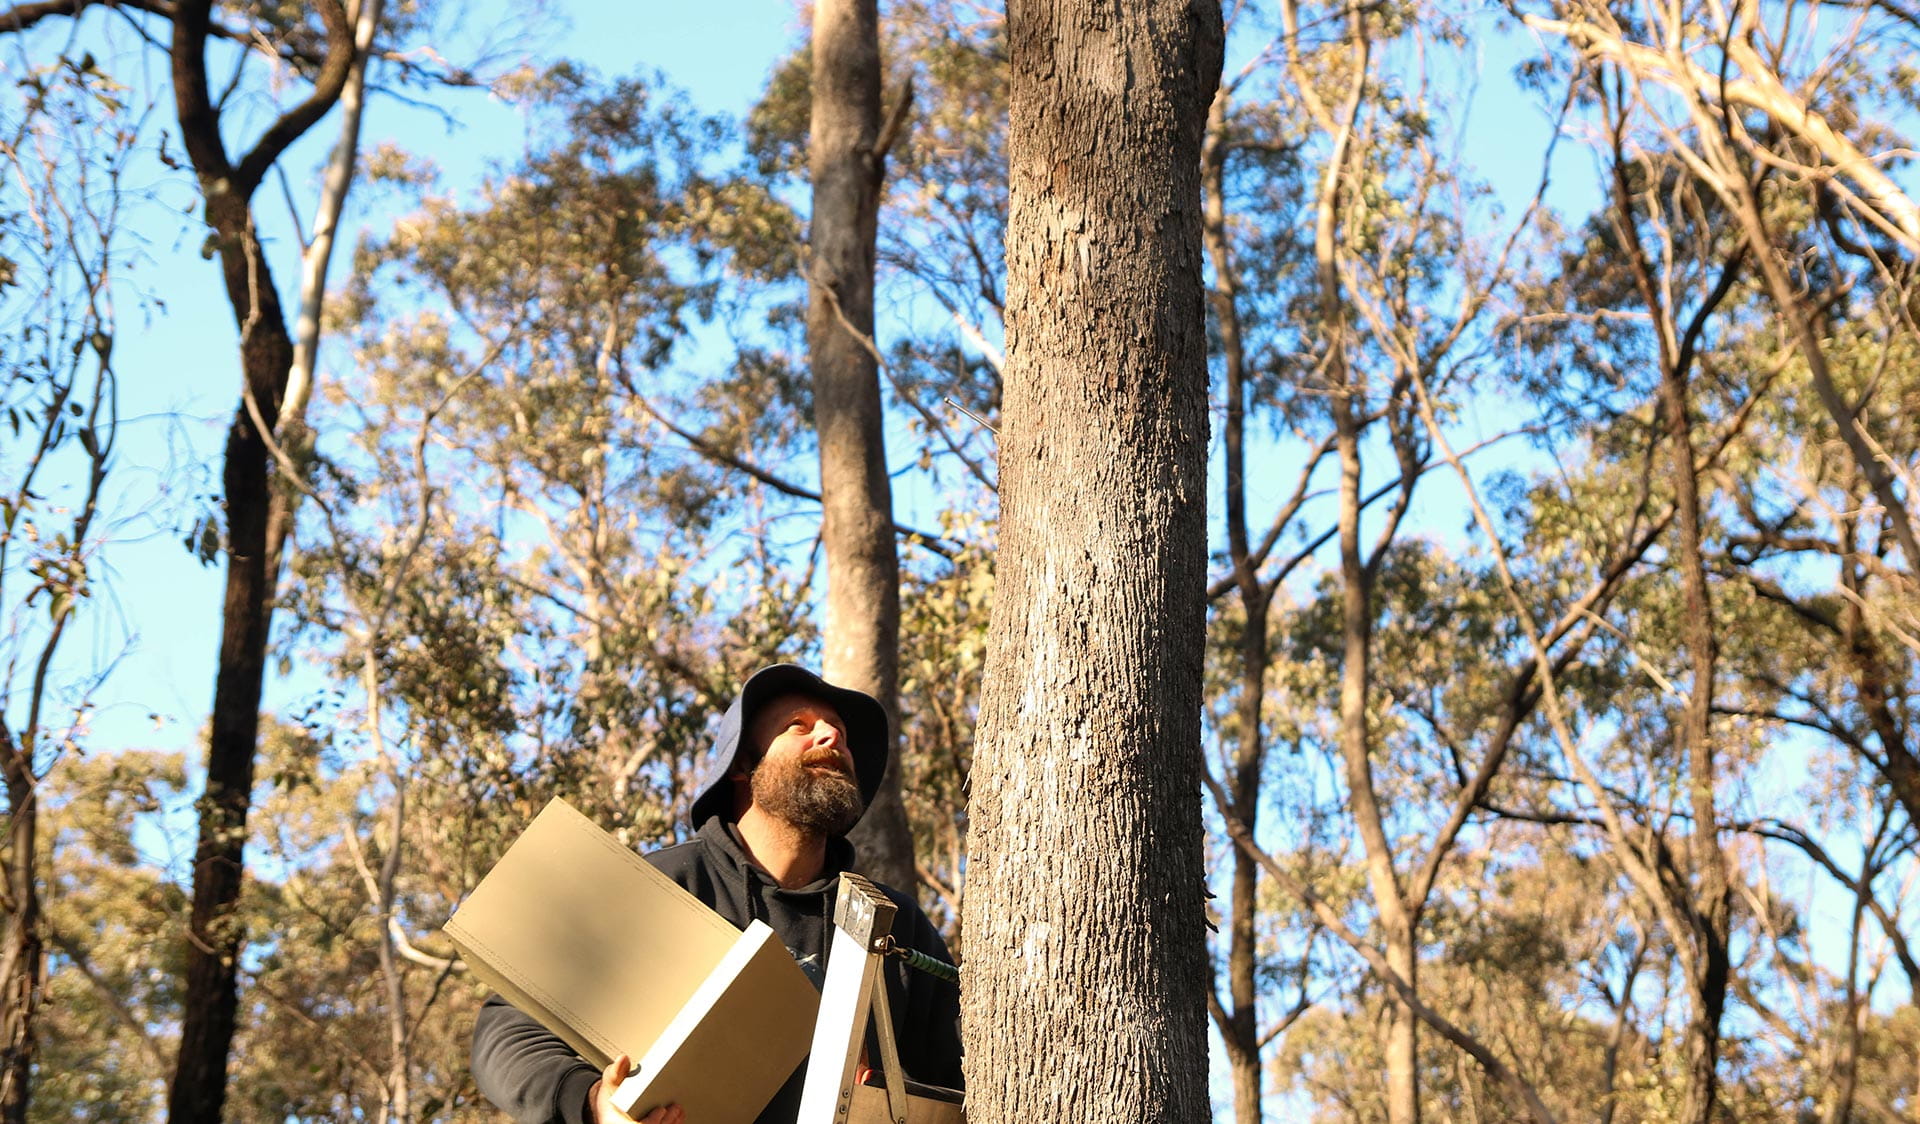 A man in a hat holding a wooden box looking up next to a ladder leaning against a tree.